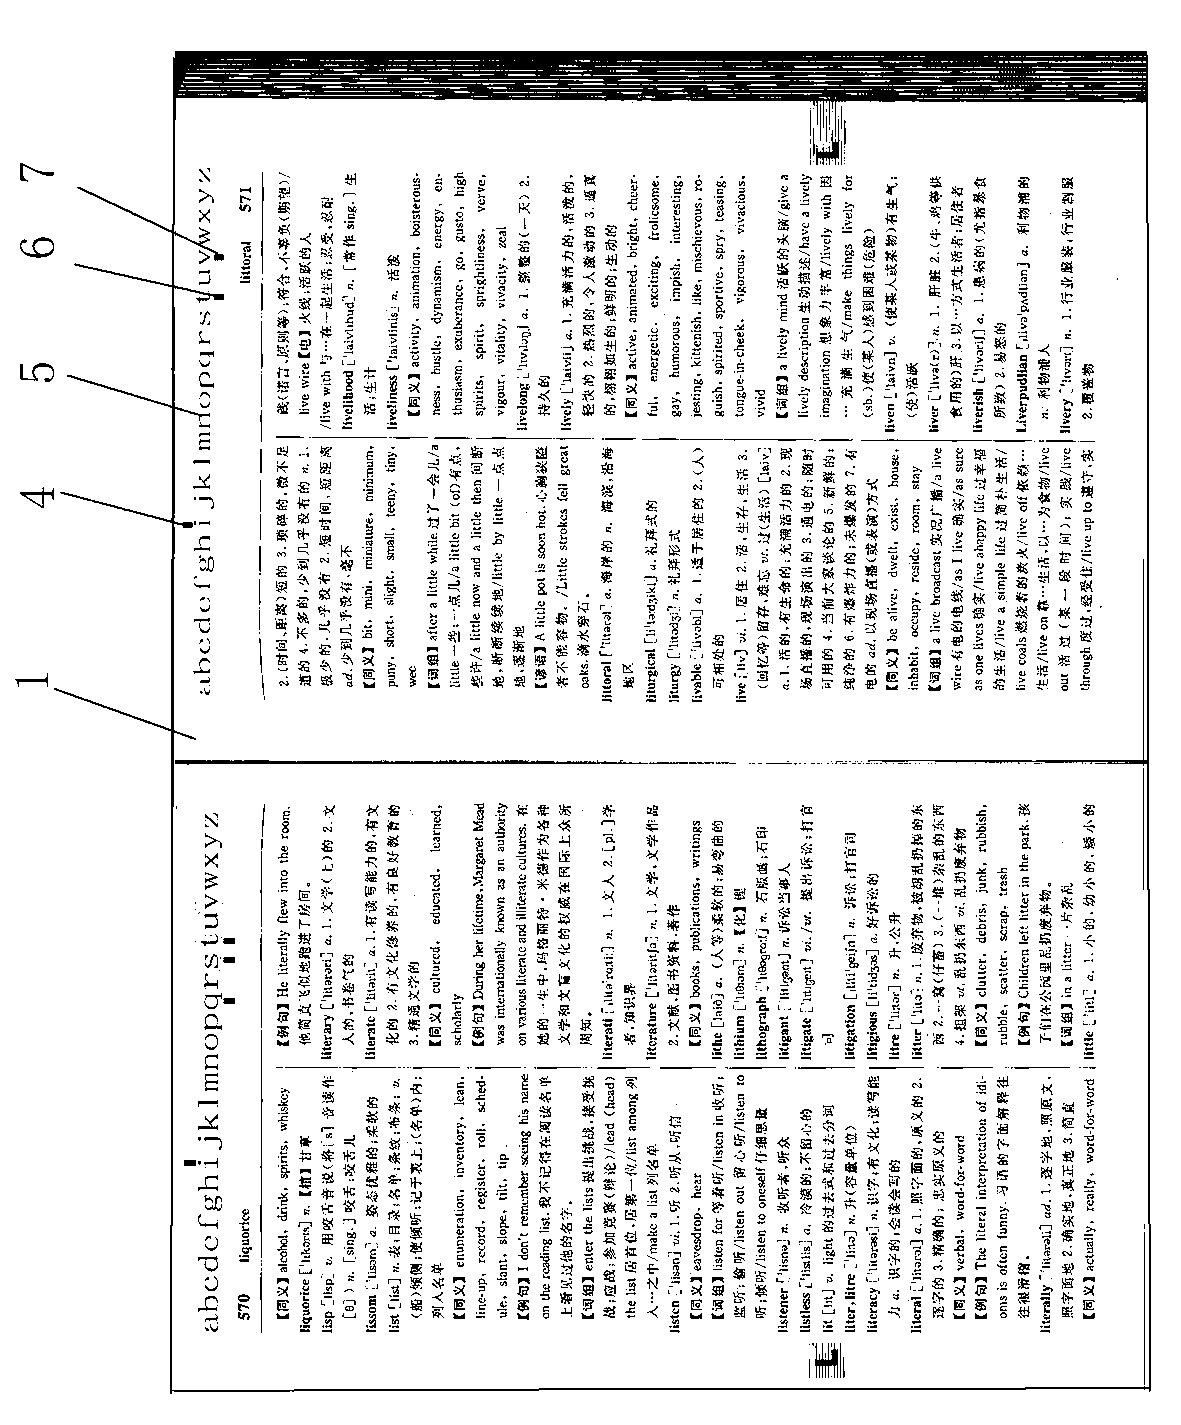 Dictionary with English letter ruler and English word searching method of dictionary